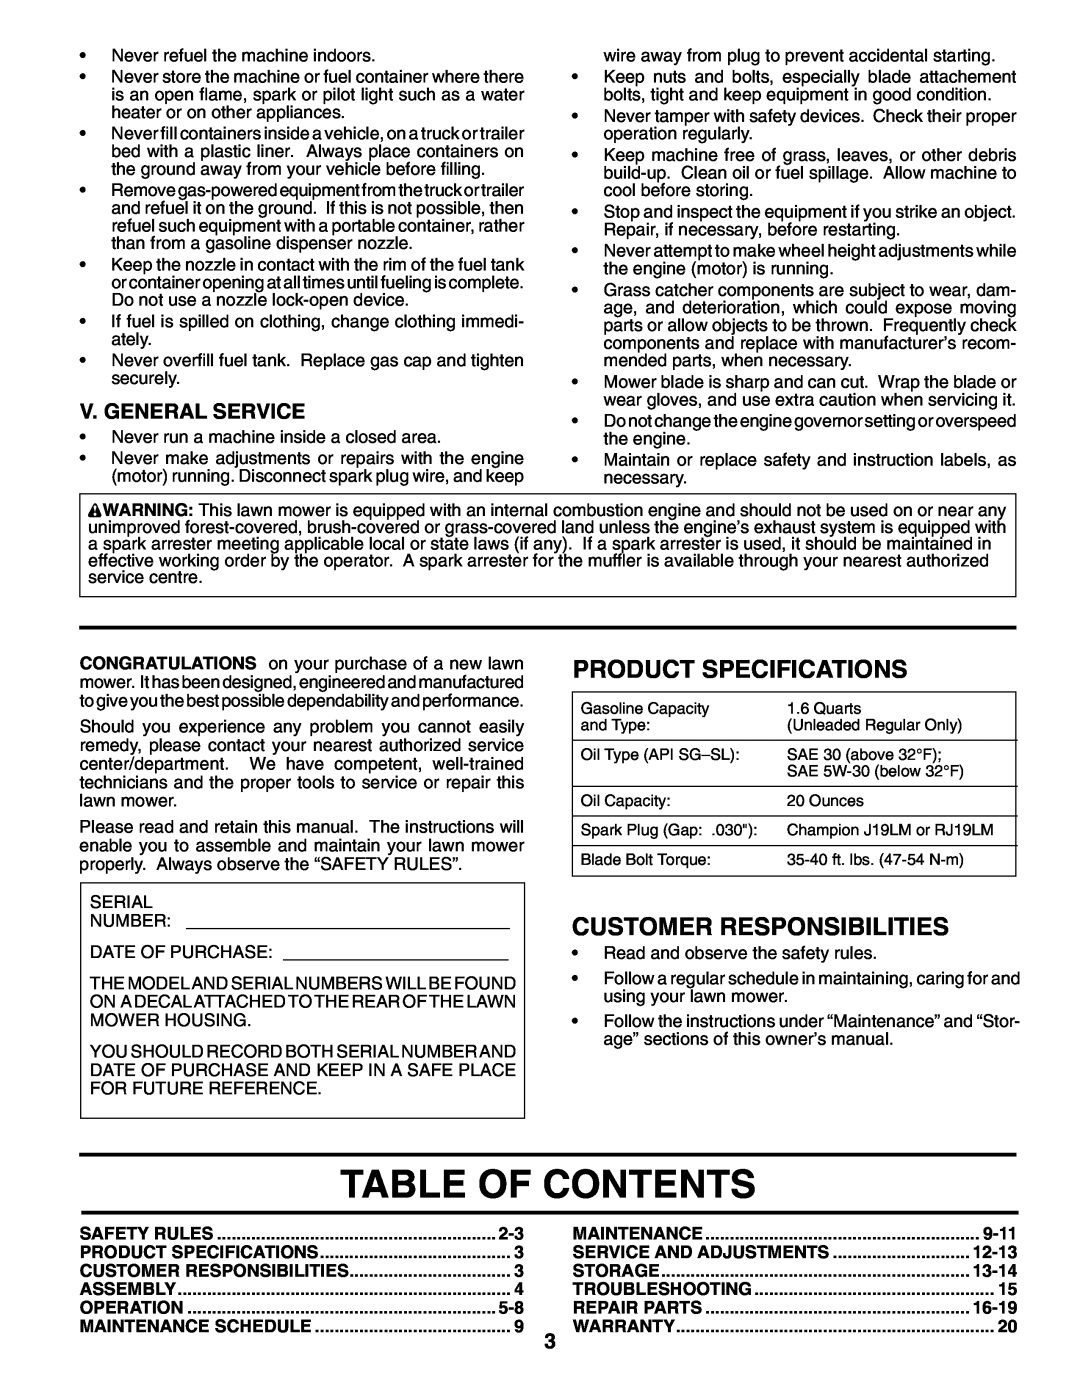 Husqvarna 62522SH Table Of Contents, Product Specifications, Customer Responsibilities, V. General Service, 9-11, 12-13 